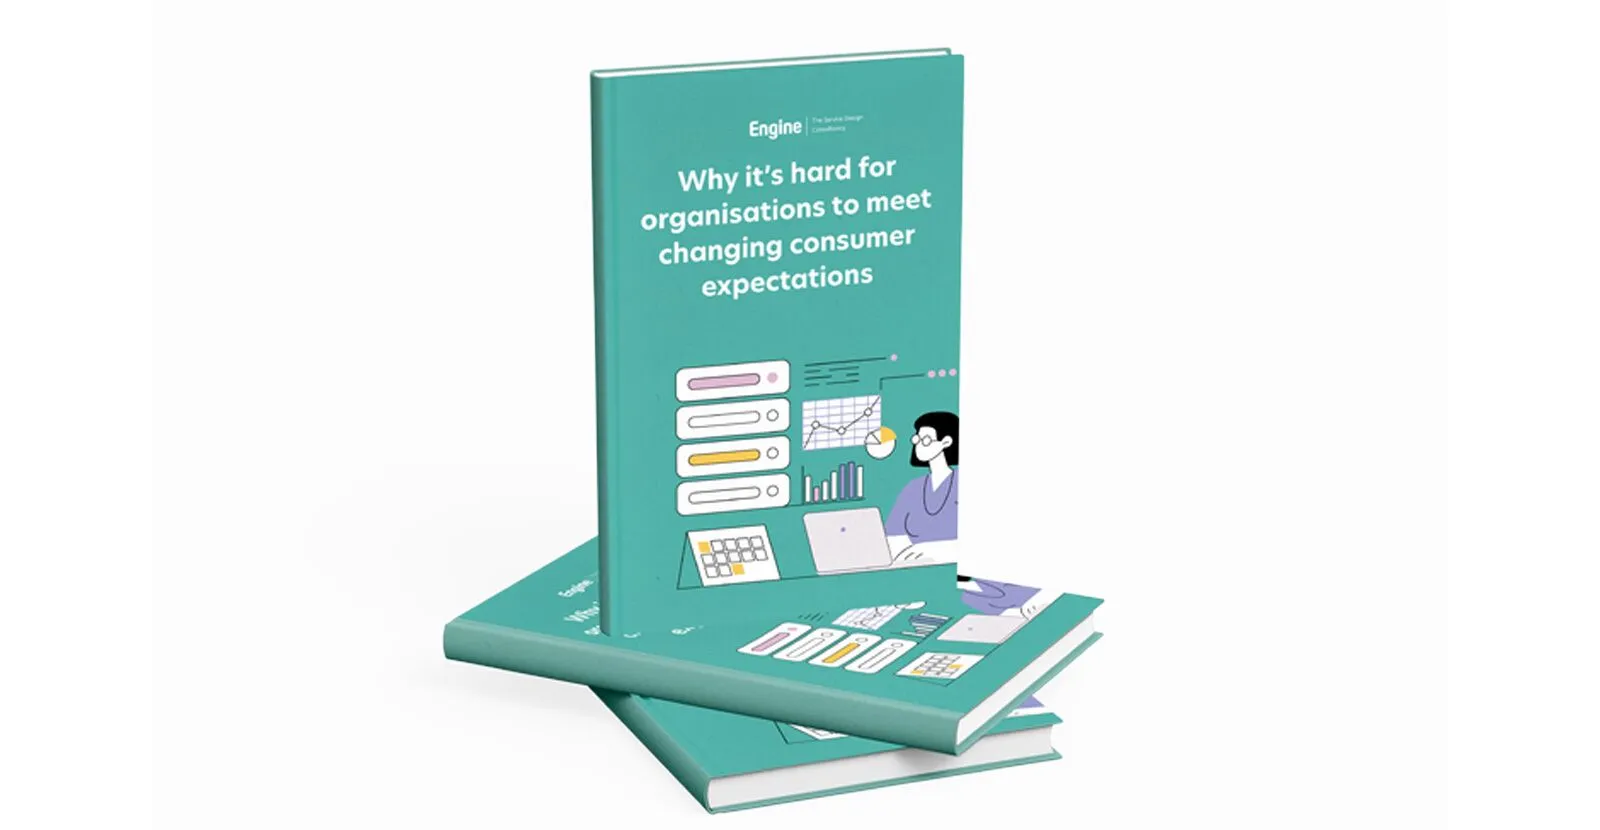 Why it’s hard for organisations to meet changing consumer expectations